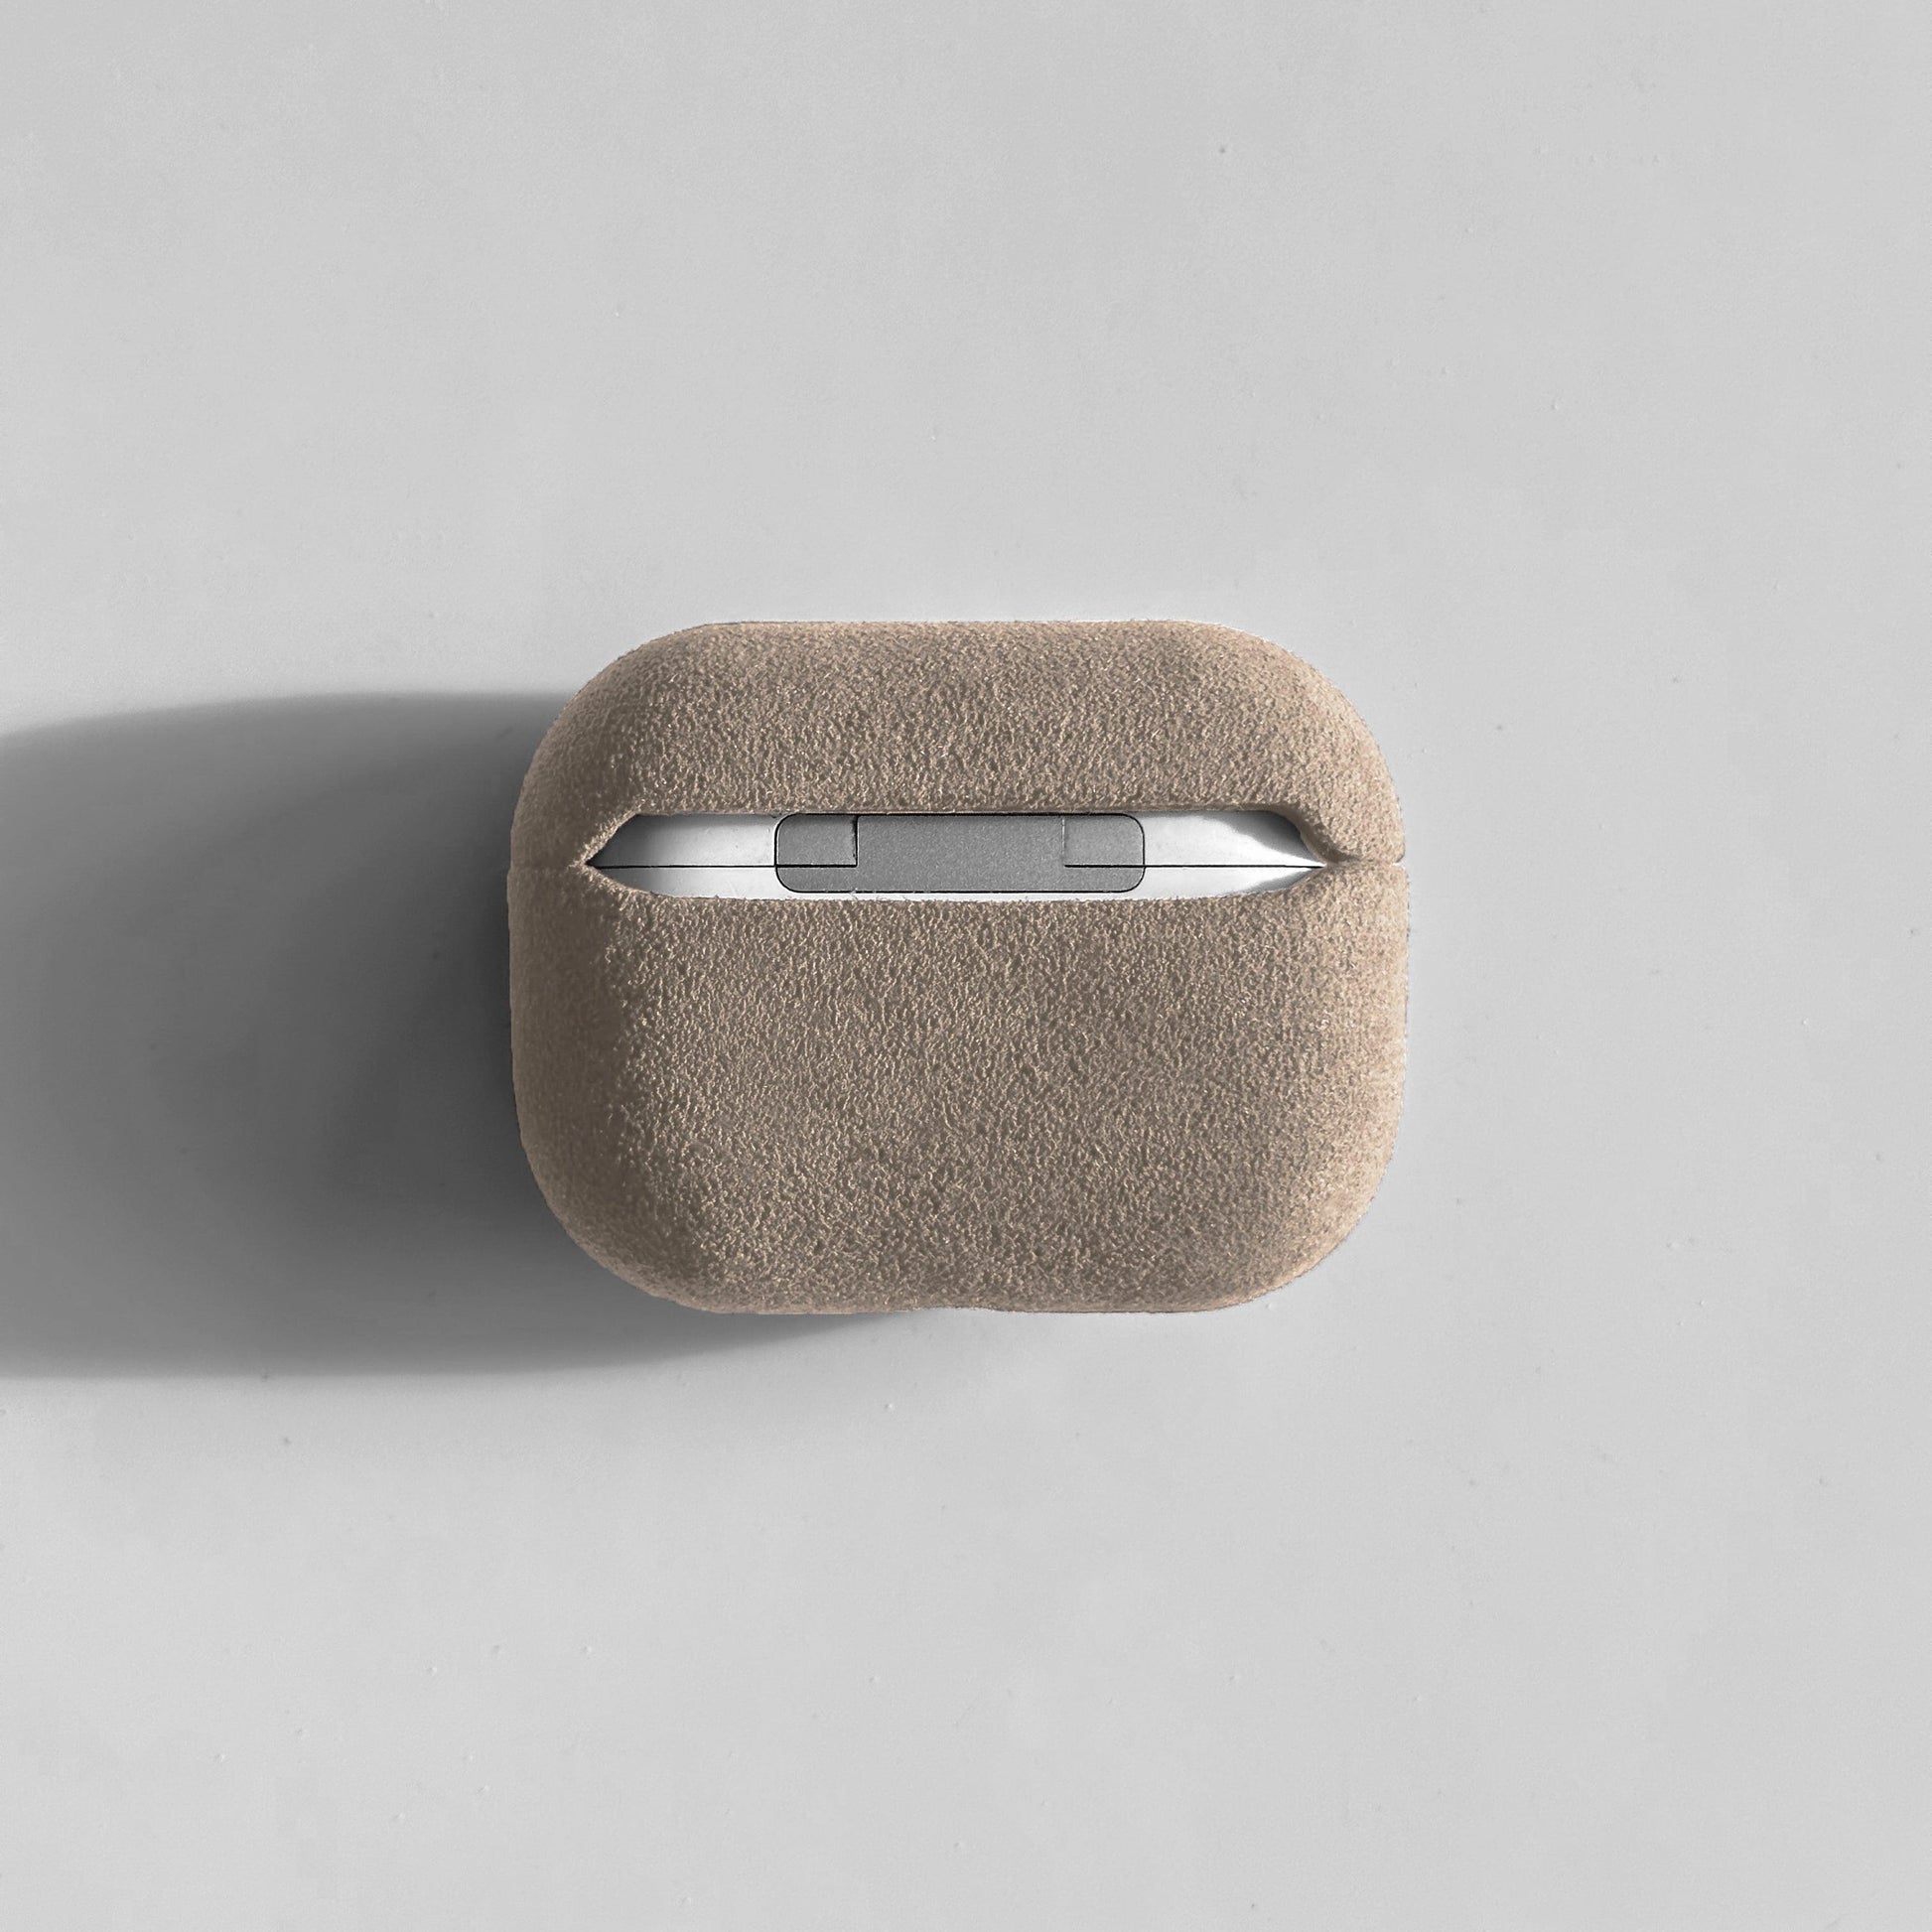 Alcantara Suede Leather iPhone Case and Accessories Collection - The AirPods Pro Case - Malibu Beige - Luriax